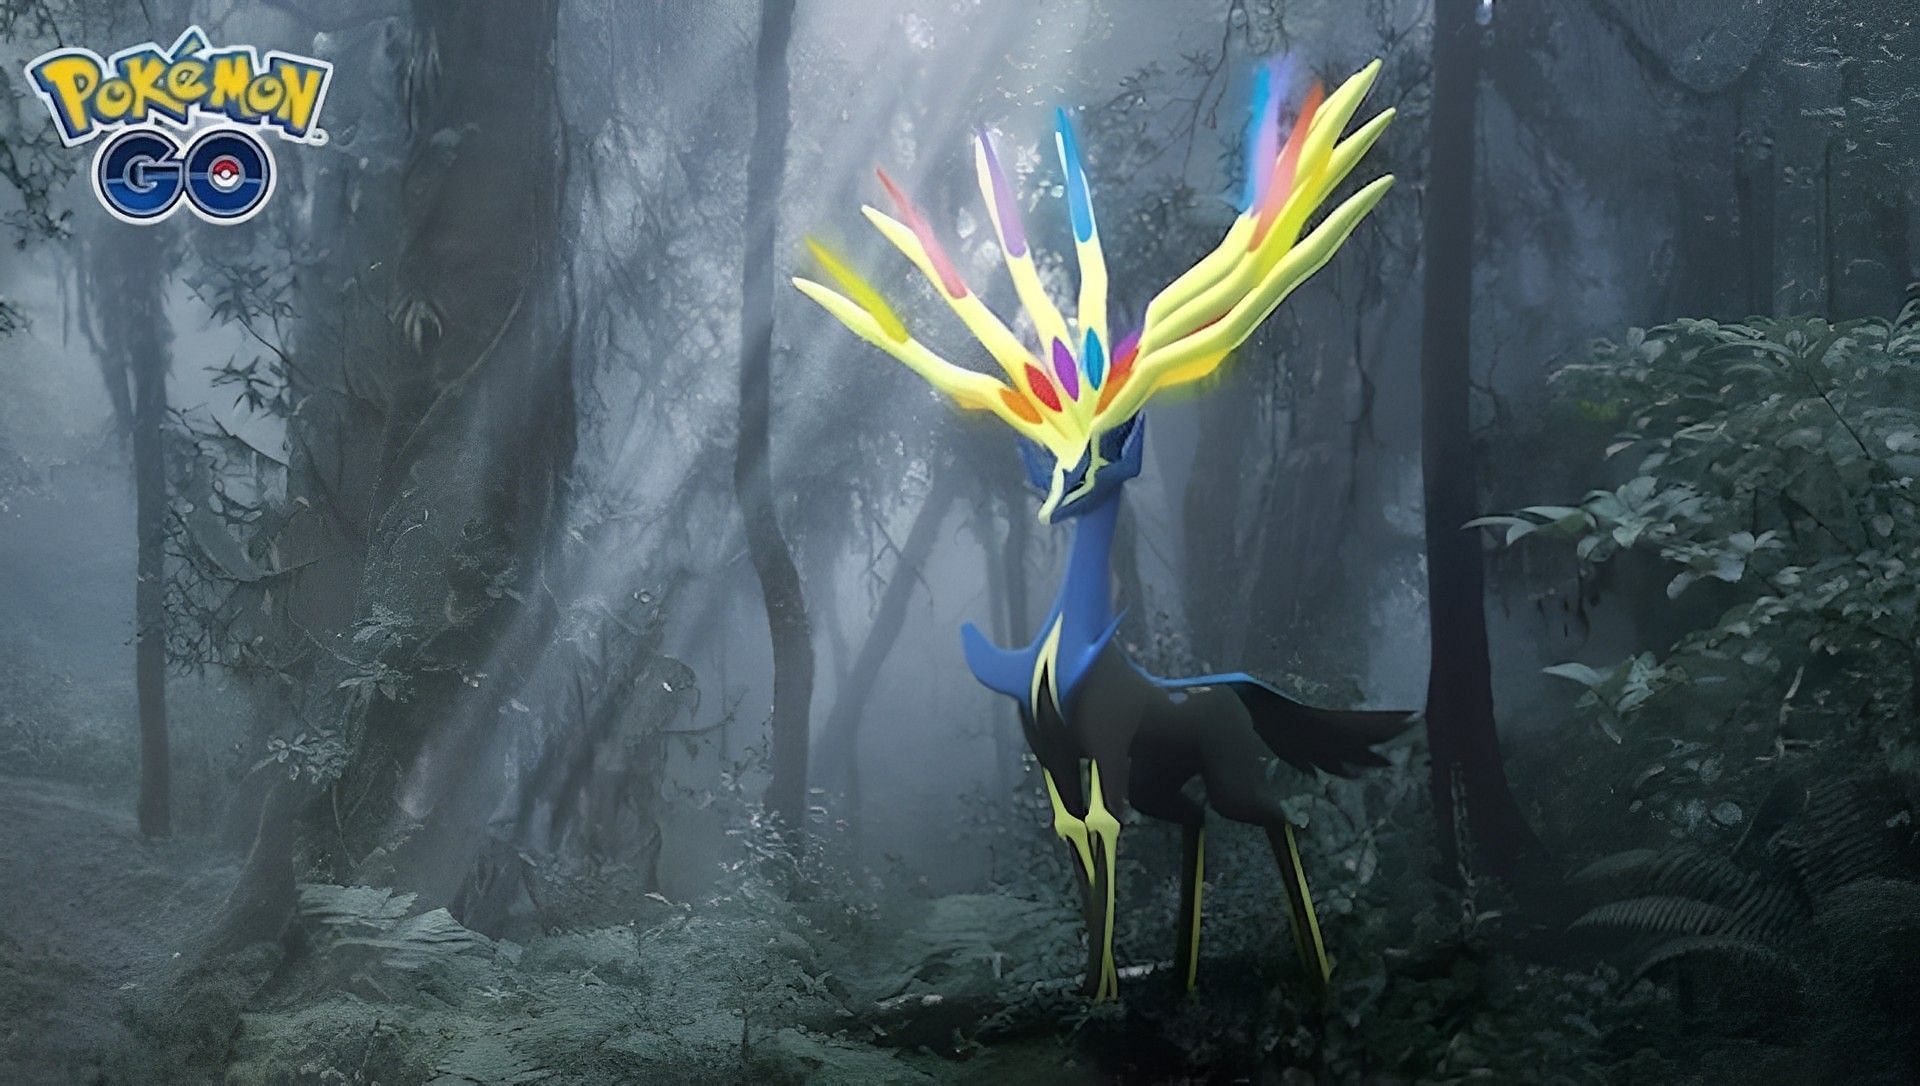 How is Shiny Xerneas obtainable?